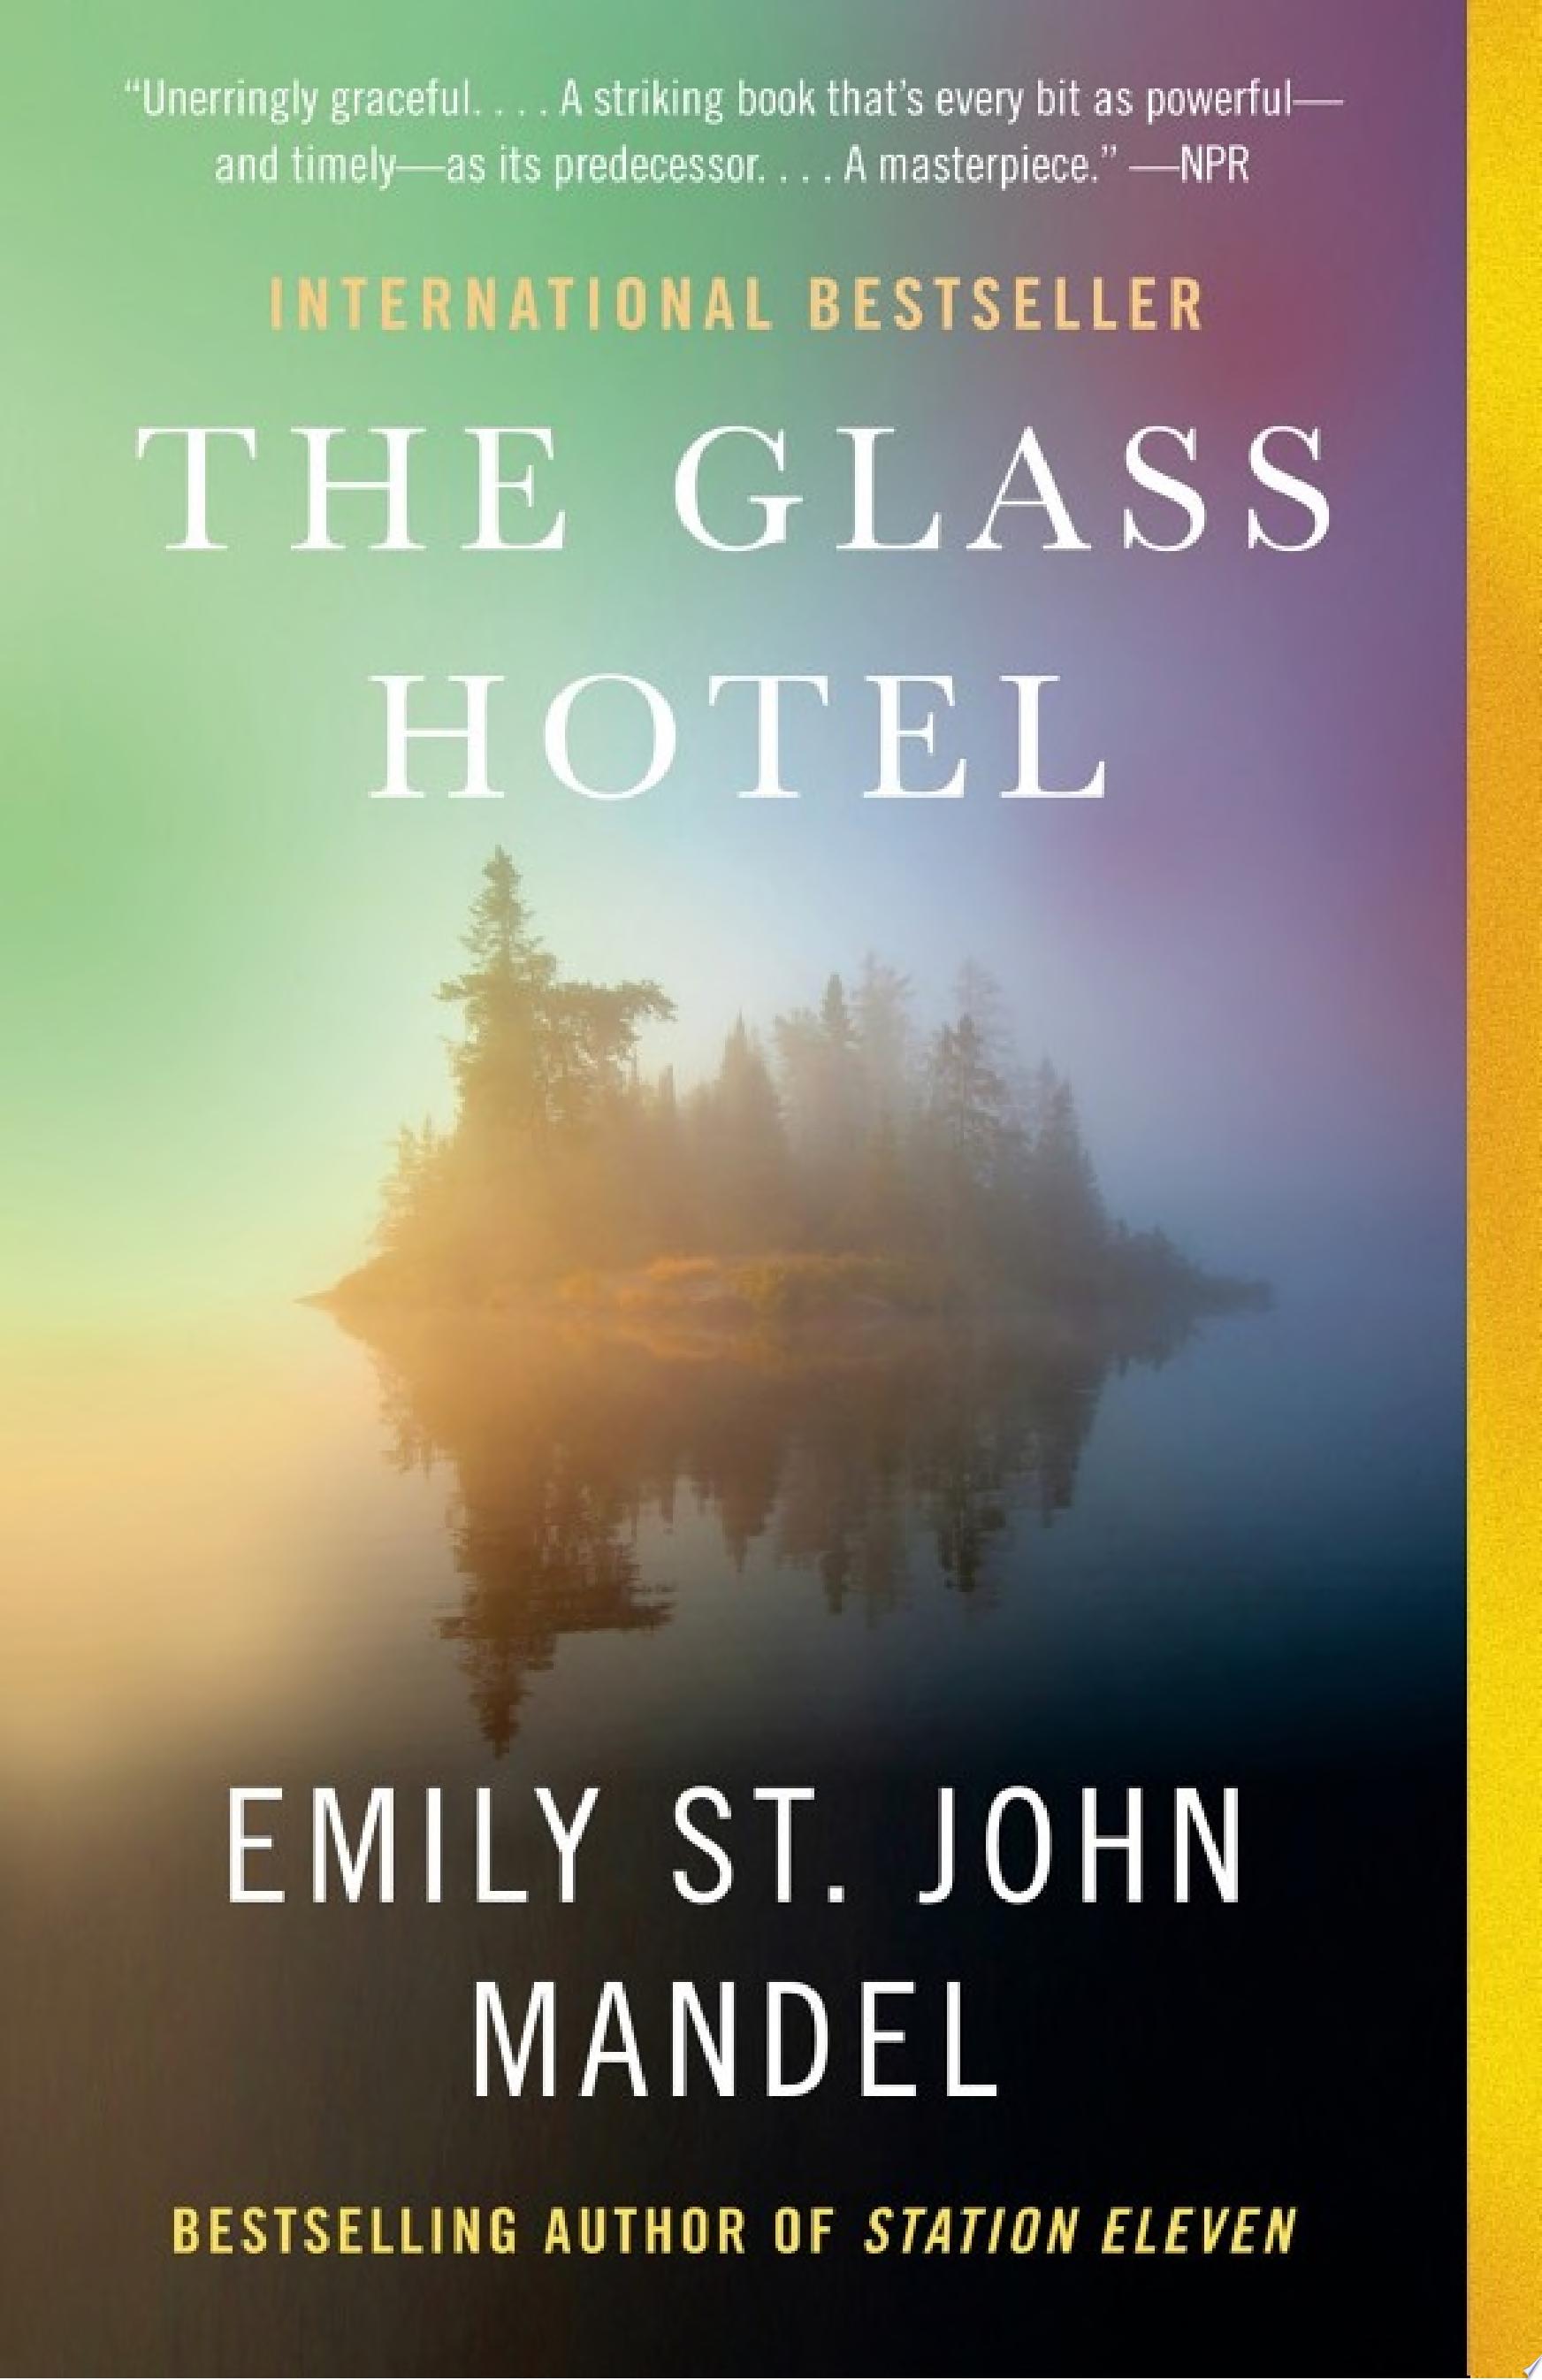 Image for "The Glass Hotel"